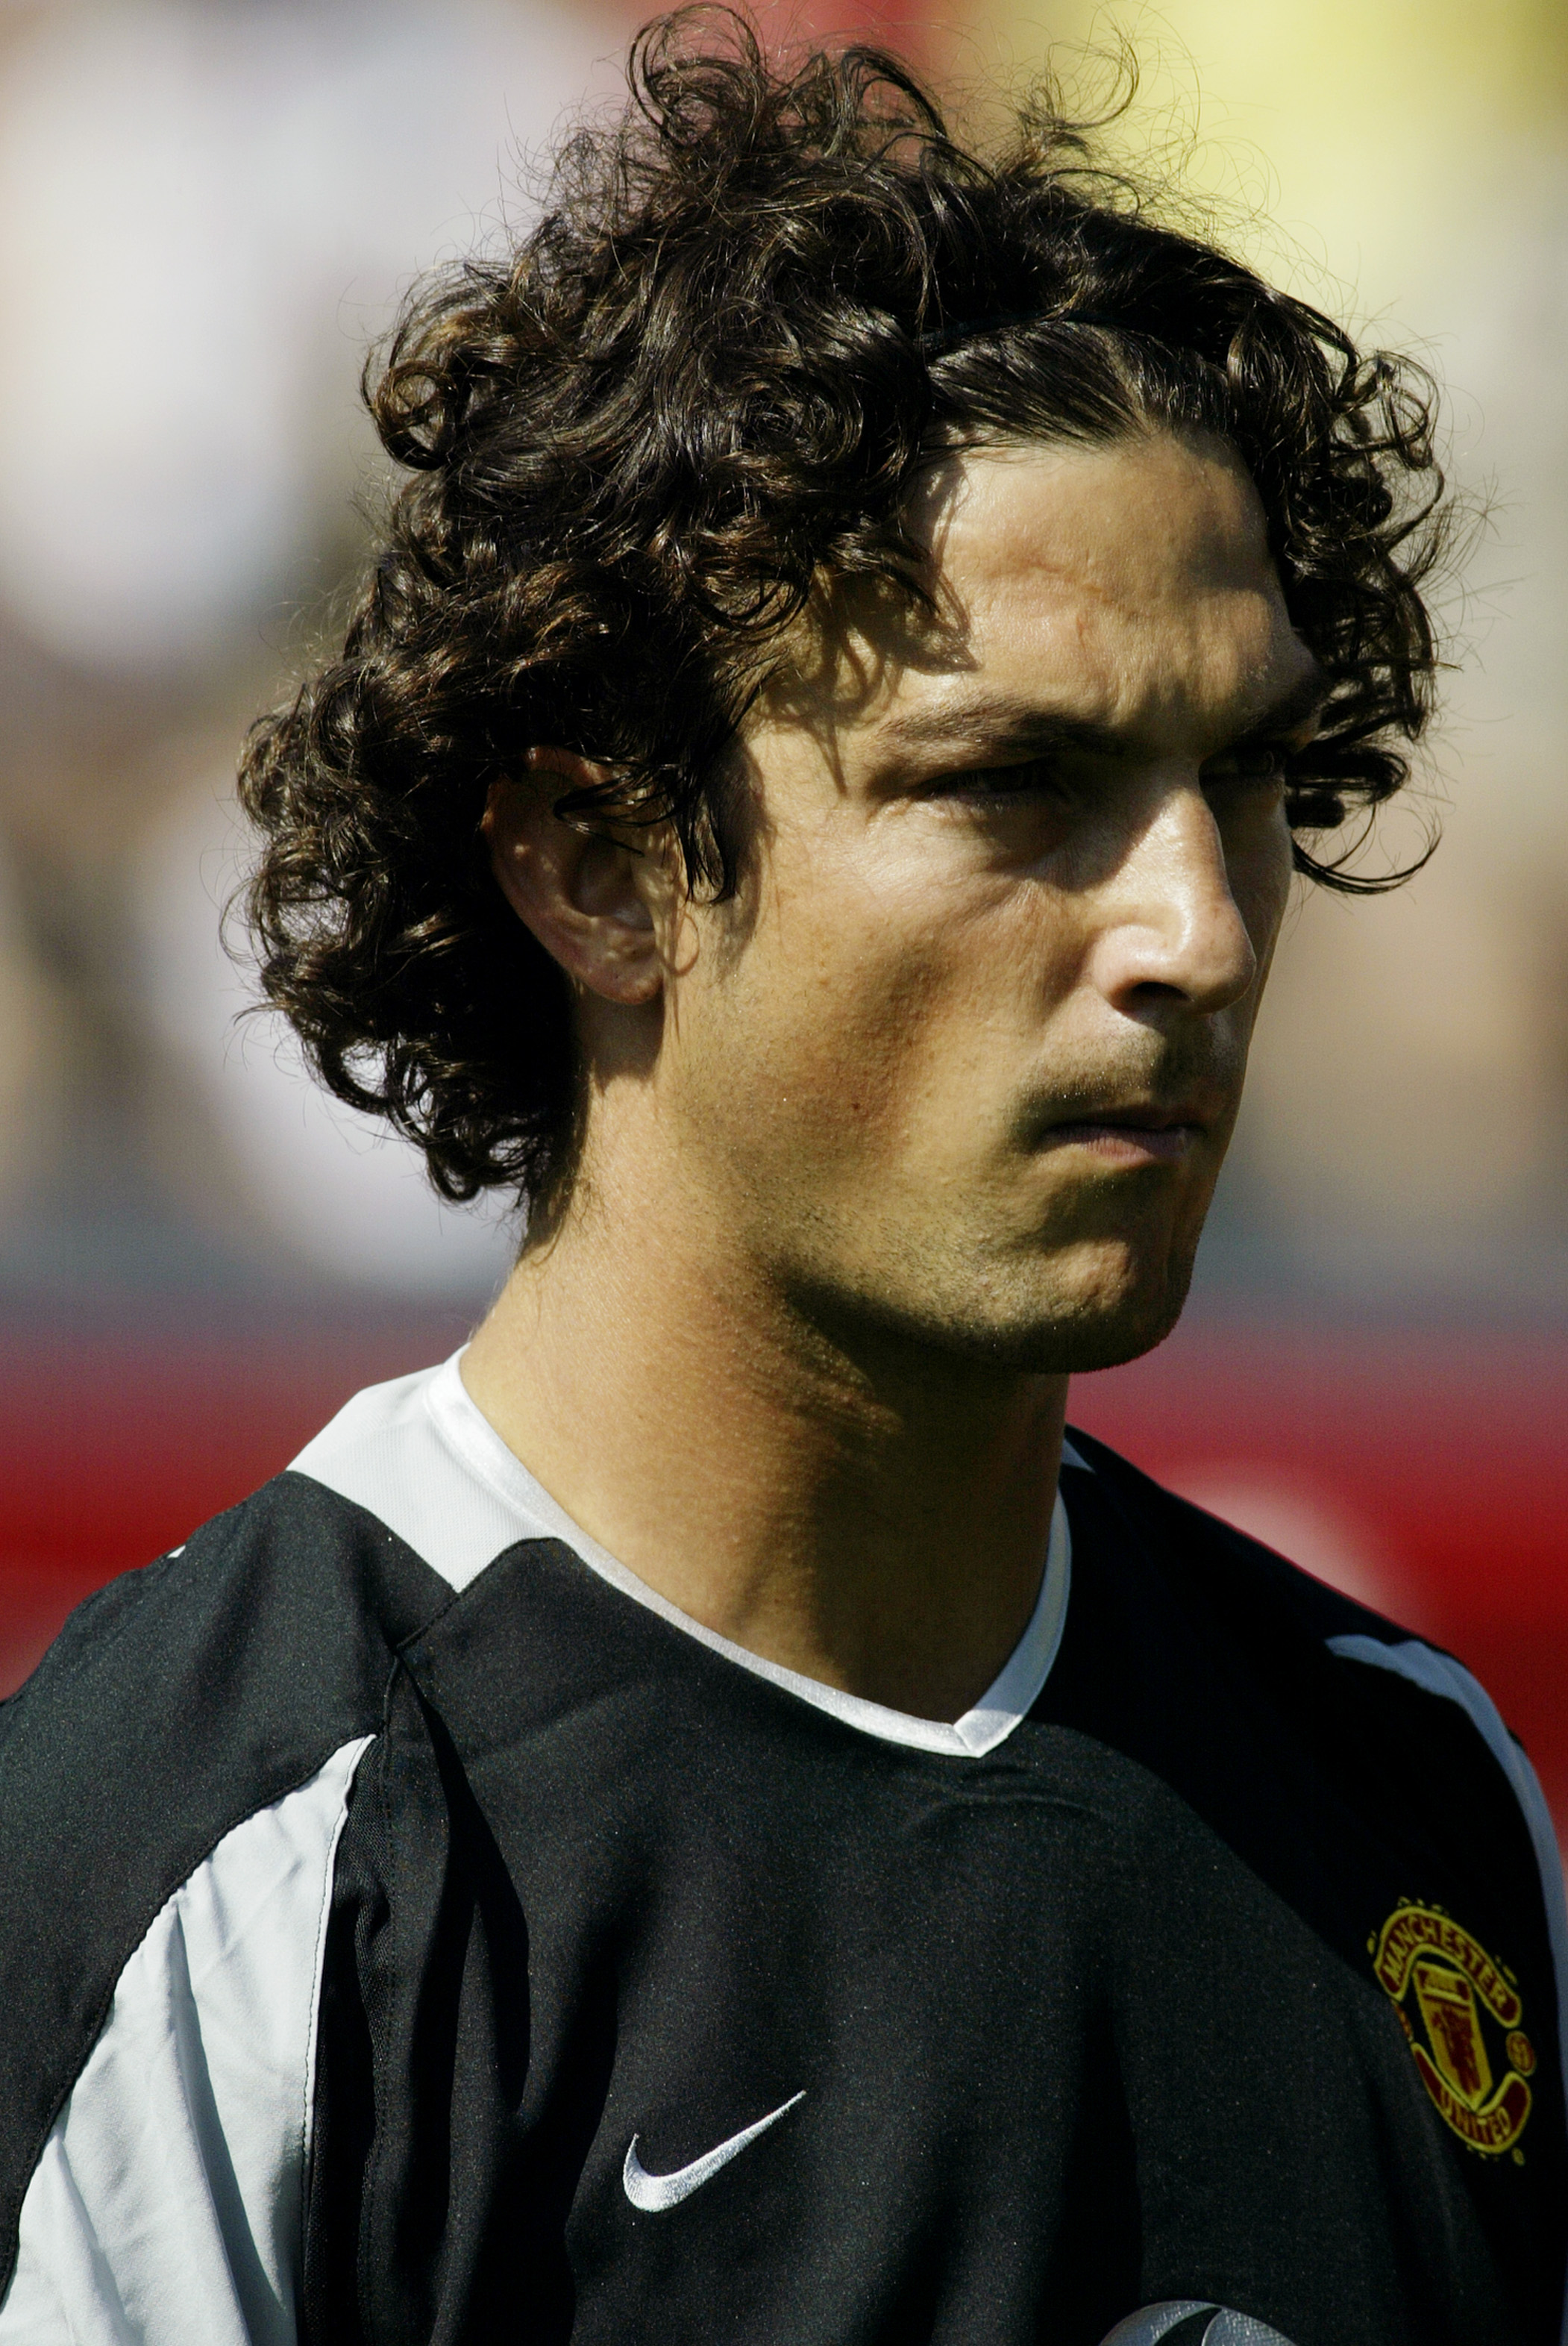 LOS ANGELES - JULY 27:  Portrait of Ricardo of Manchester United taken before the USA Tour match between Club America and Manchester United held on July 27, 2003 at the Los Angeles Coliseum, in Los Angeles, California. Manchester United won the match 3-1.